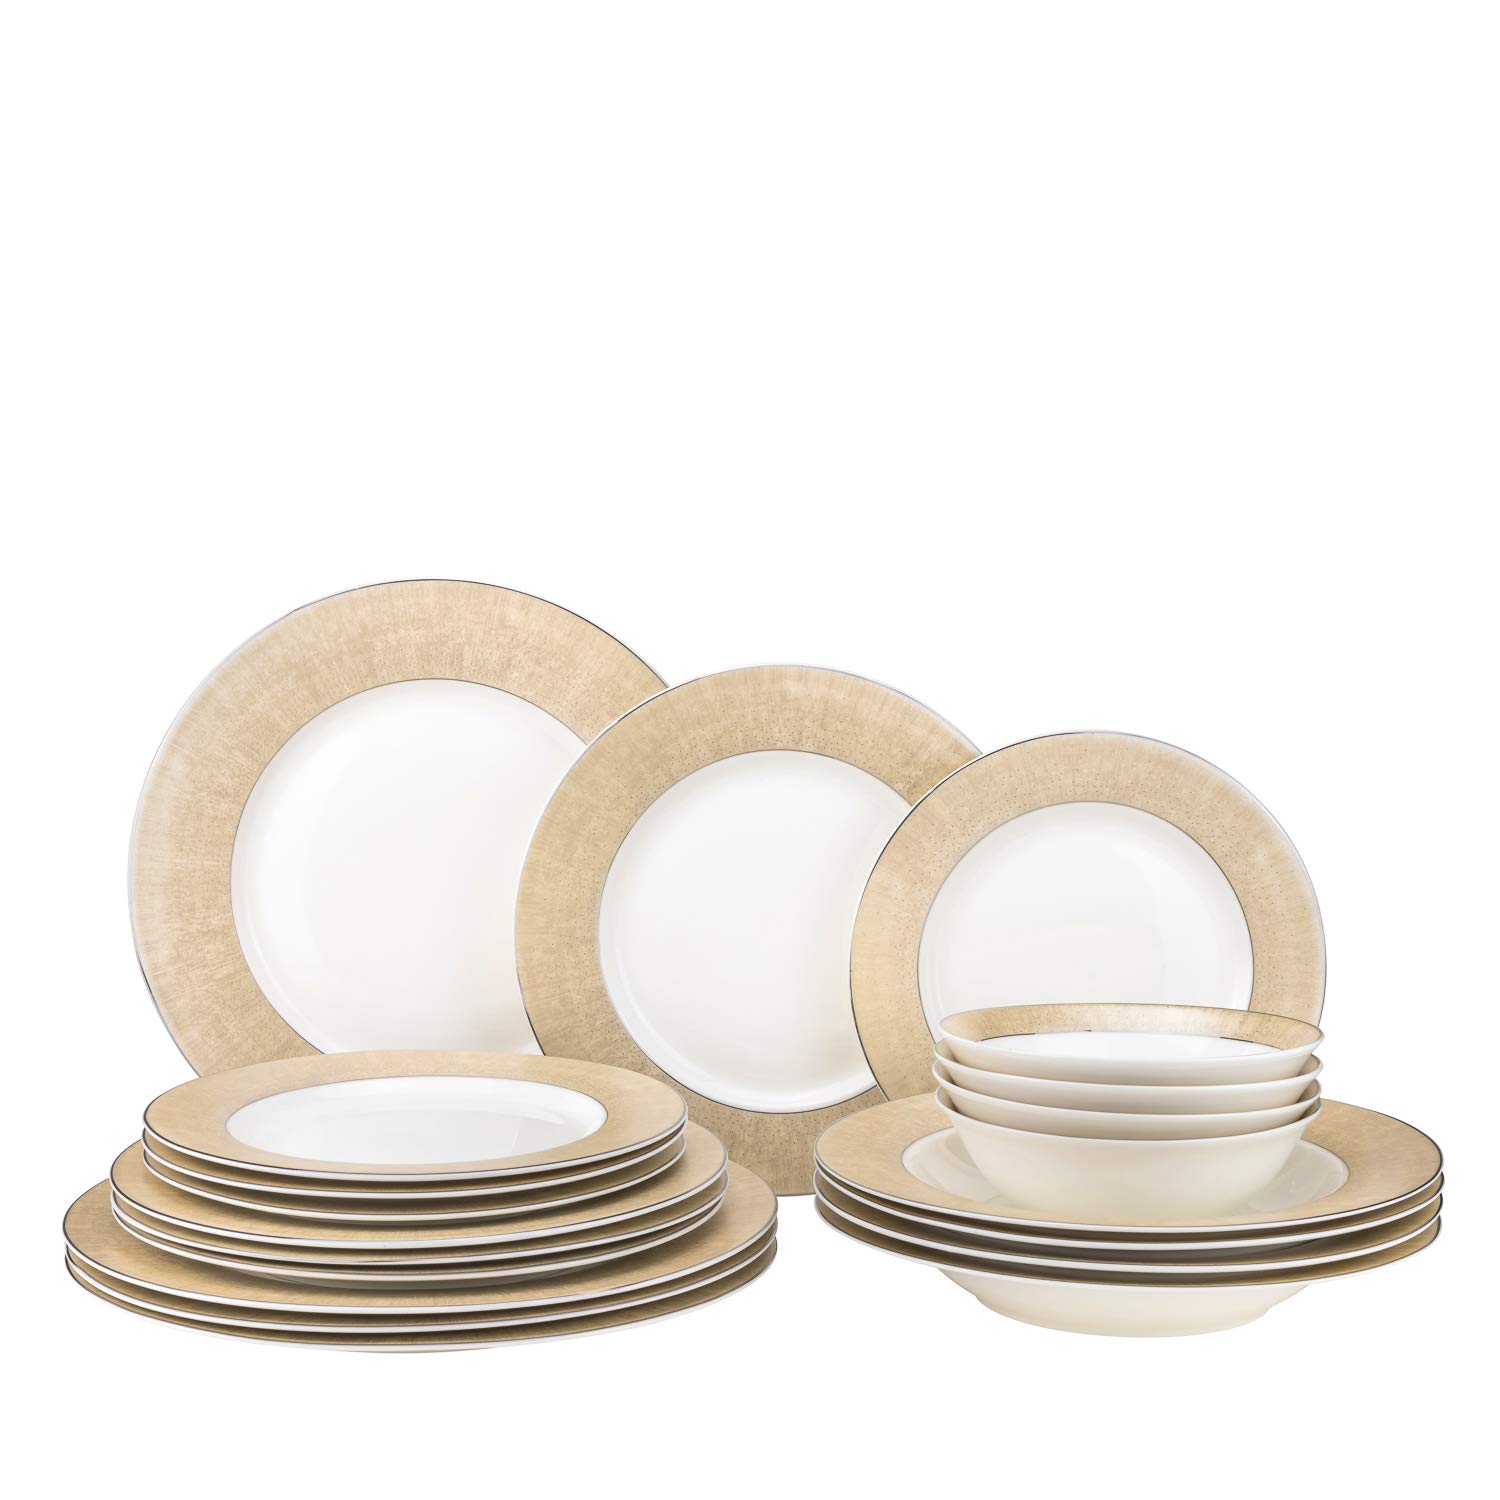 20-pc. Dinner Set Service for 4, 24K Gold-plated Luxury Bone China Tableware ("Marilyn" 6480-20Y) - image 1 of 4